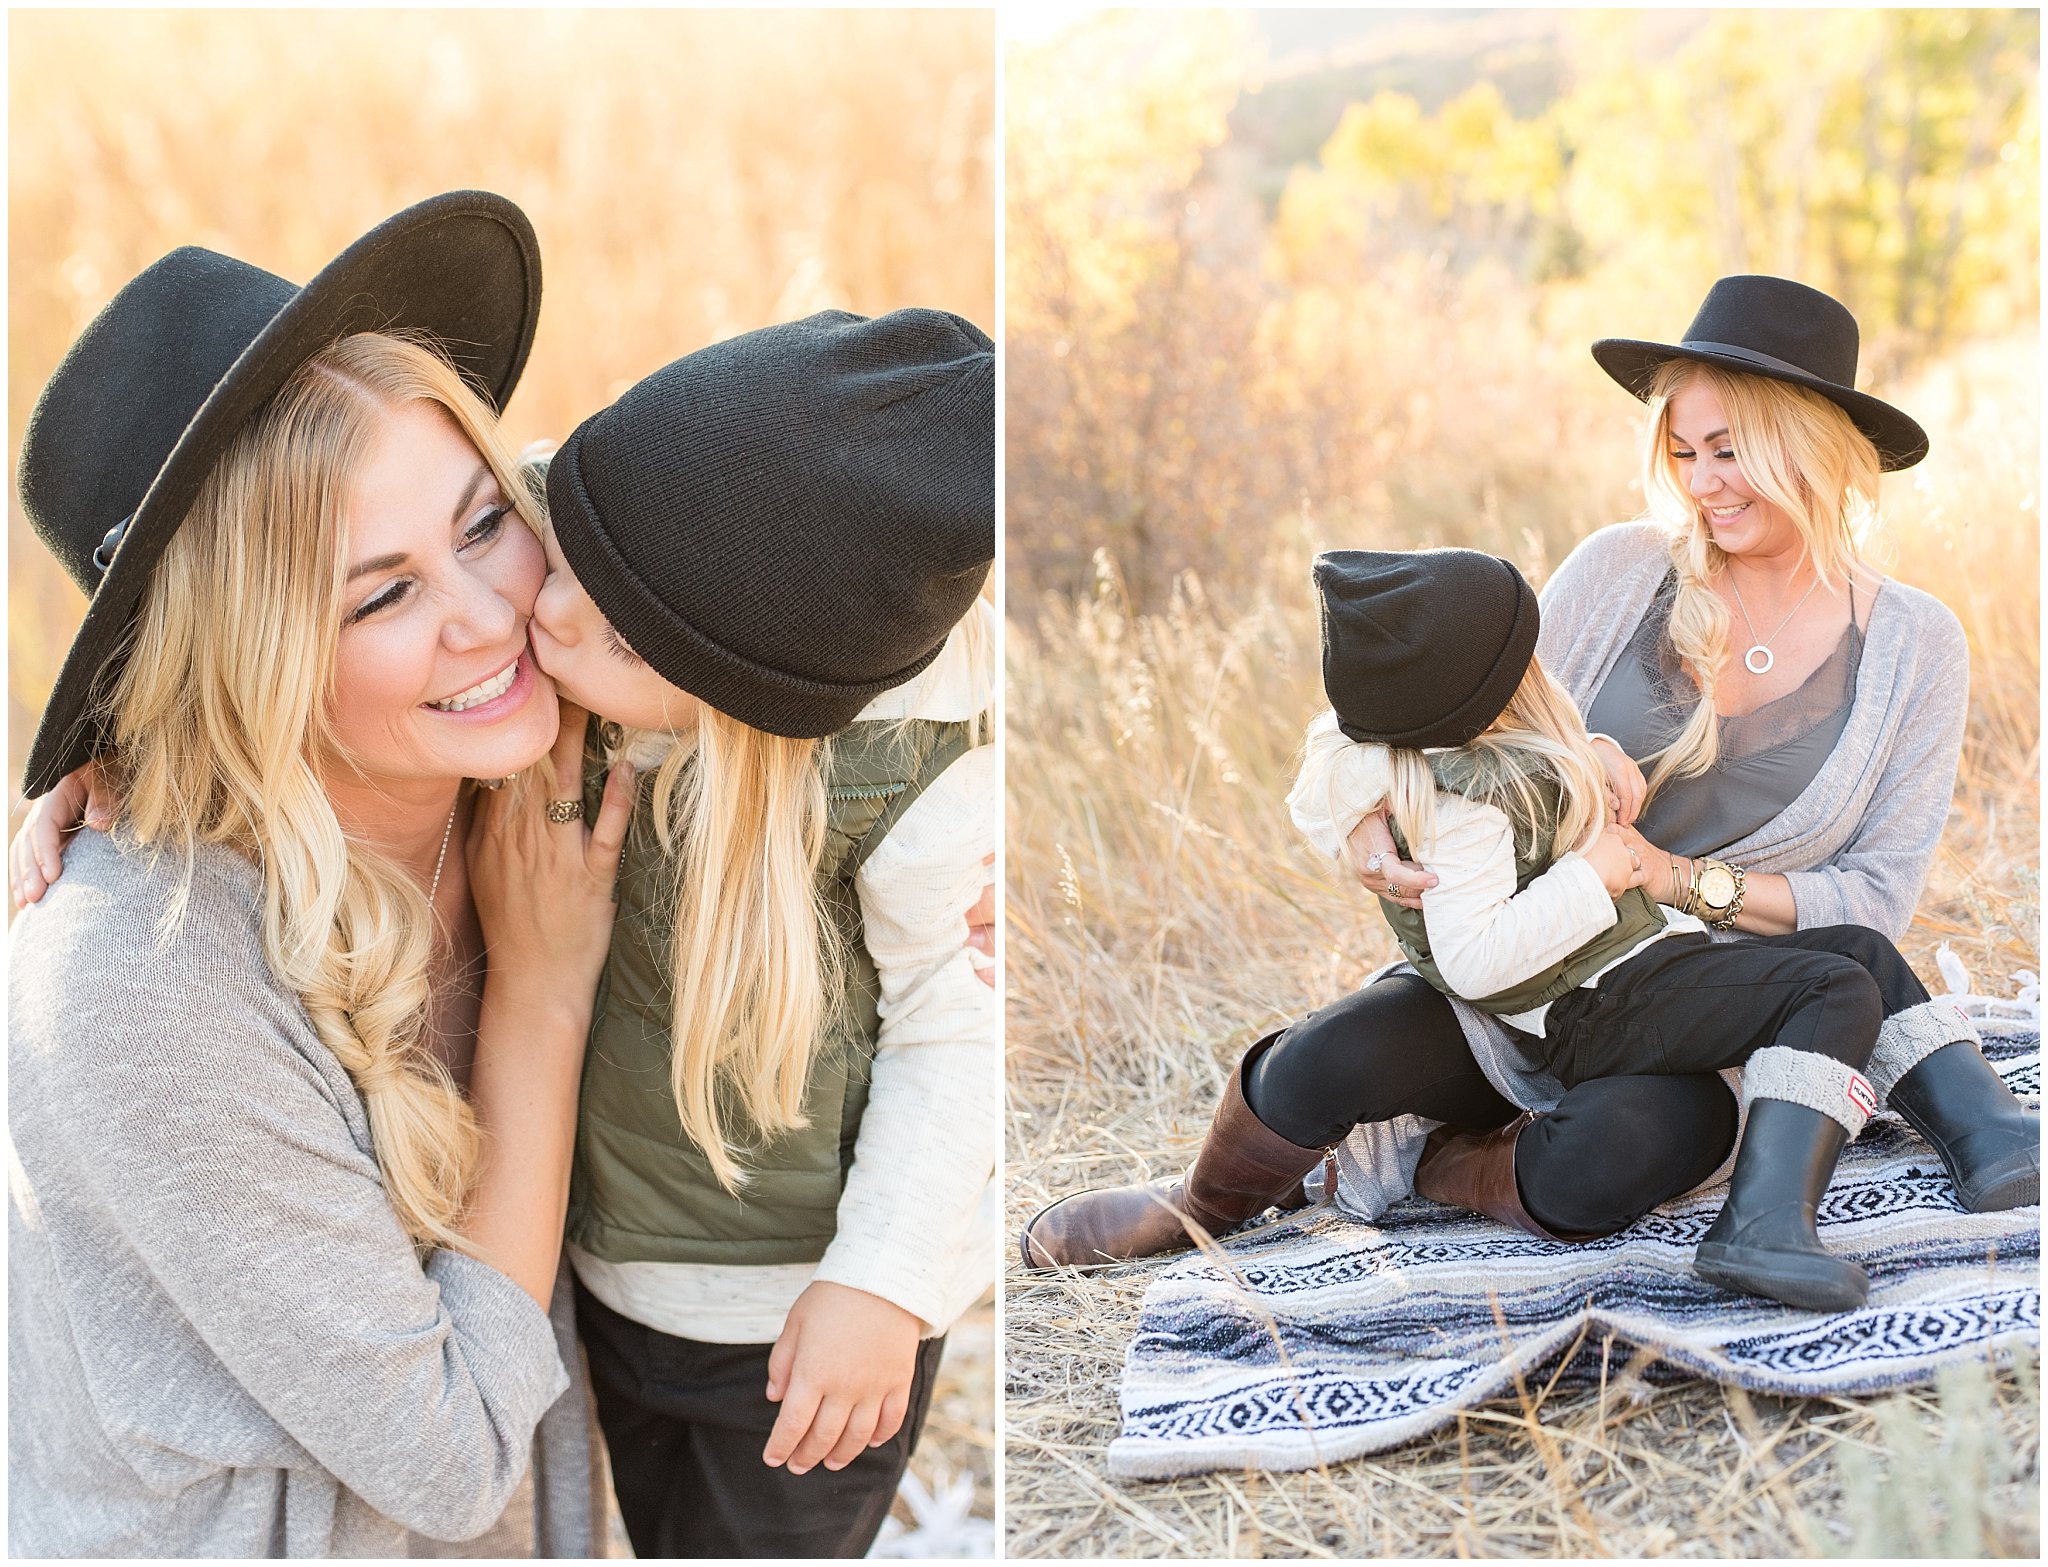 Son kissing mom on the cheek and having a tickle fight | Fall Family Pictures in the Mountains | Snowbasin, Utah | Jessie and Dallin